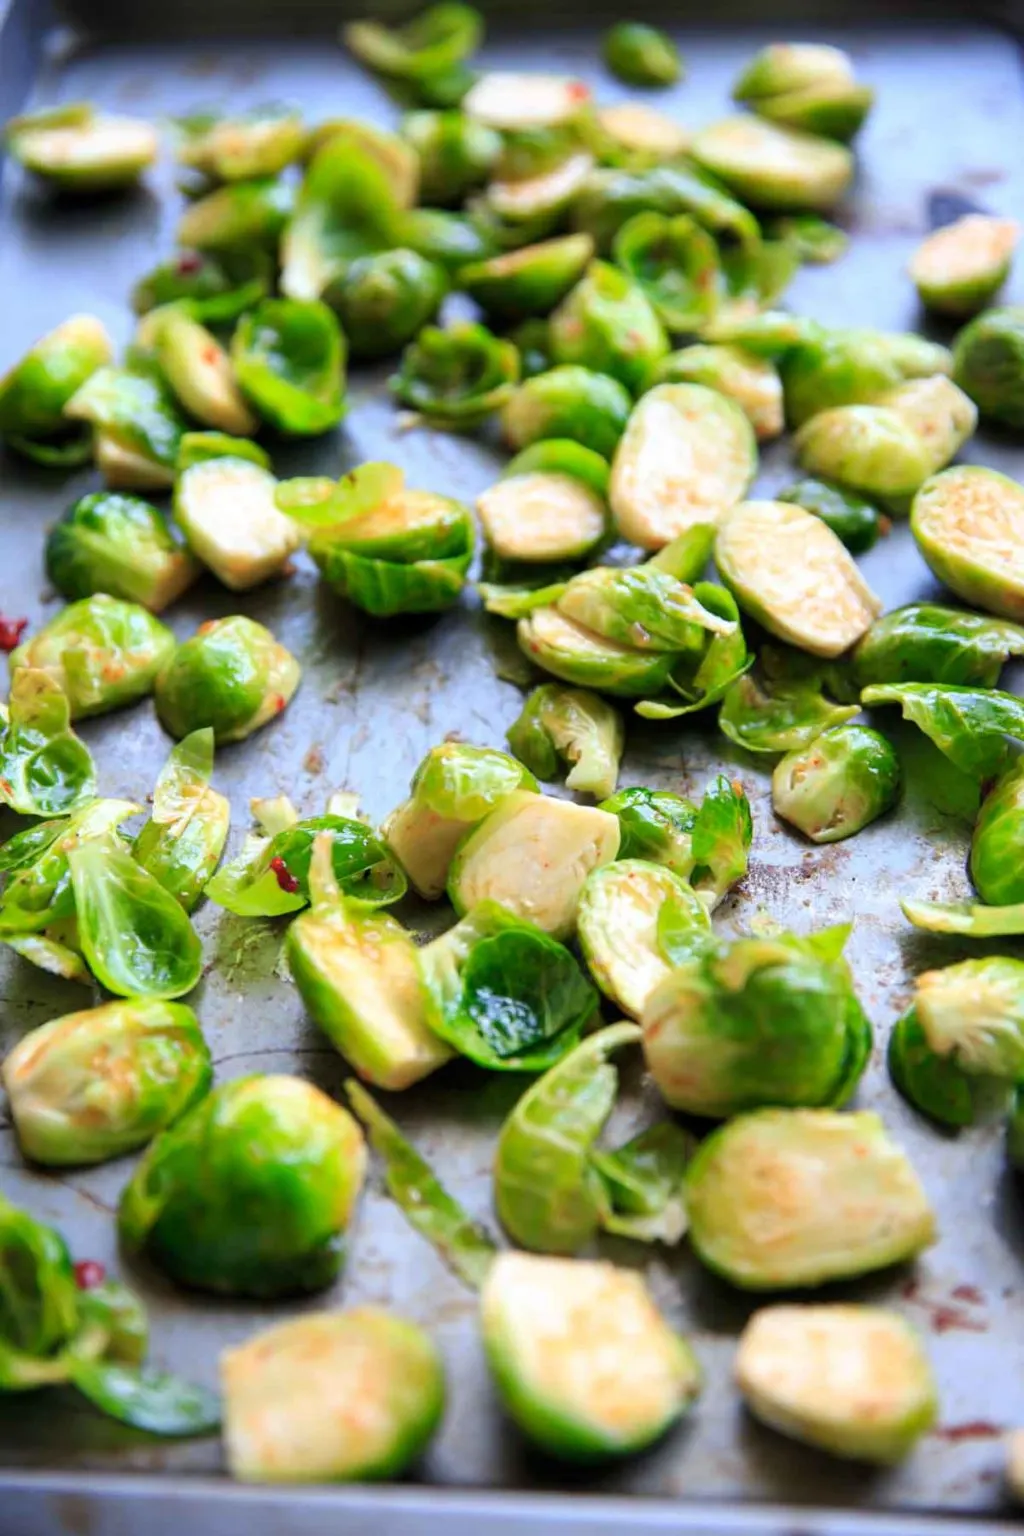 Bang Bang Brussels Sprouts. Easy and spicy side to liven up your veggies. (Pictured is raw brussels sprouts combined with sauces.)